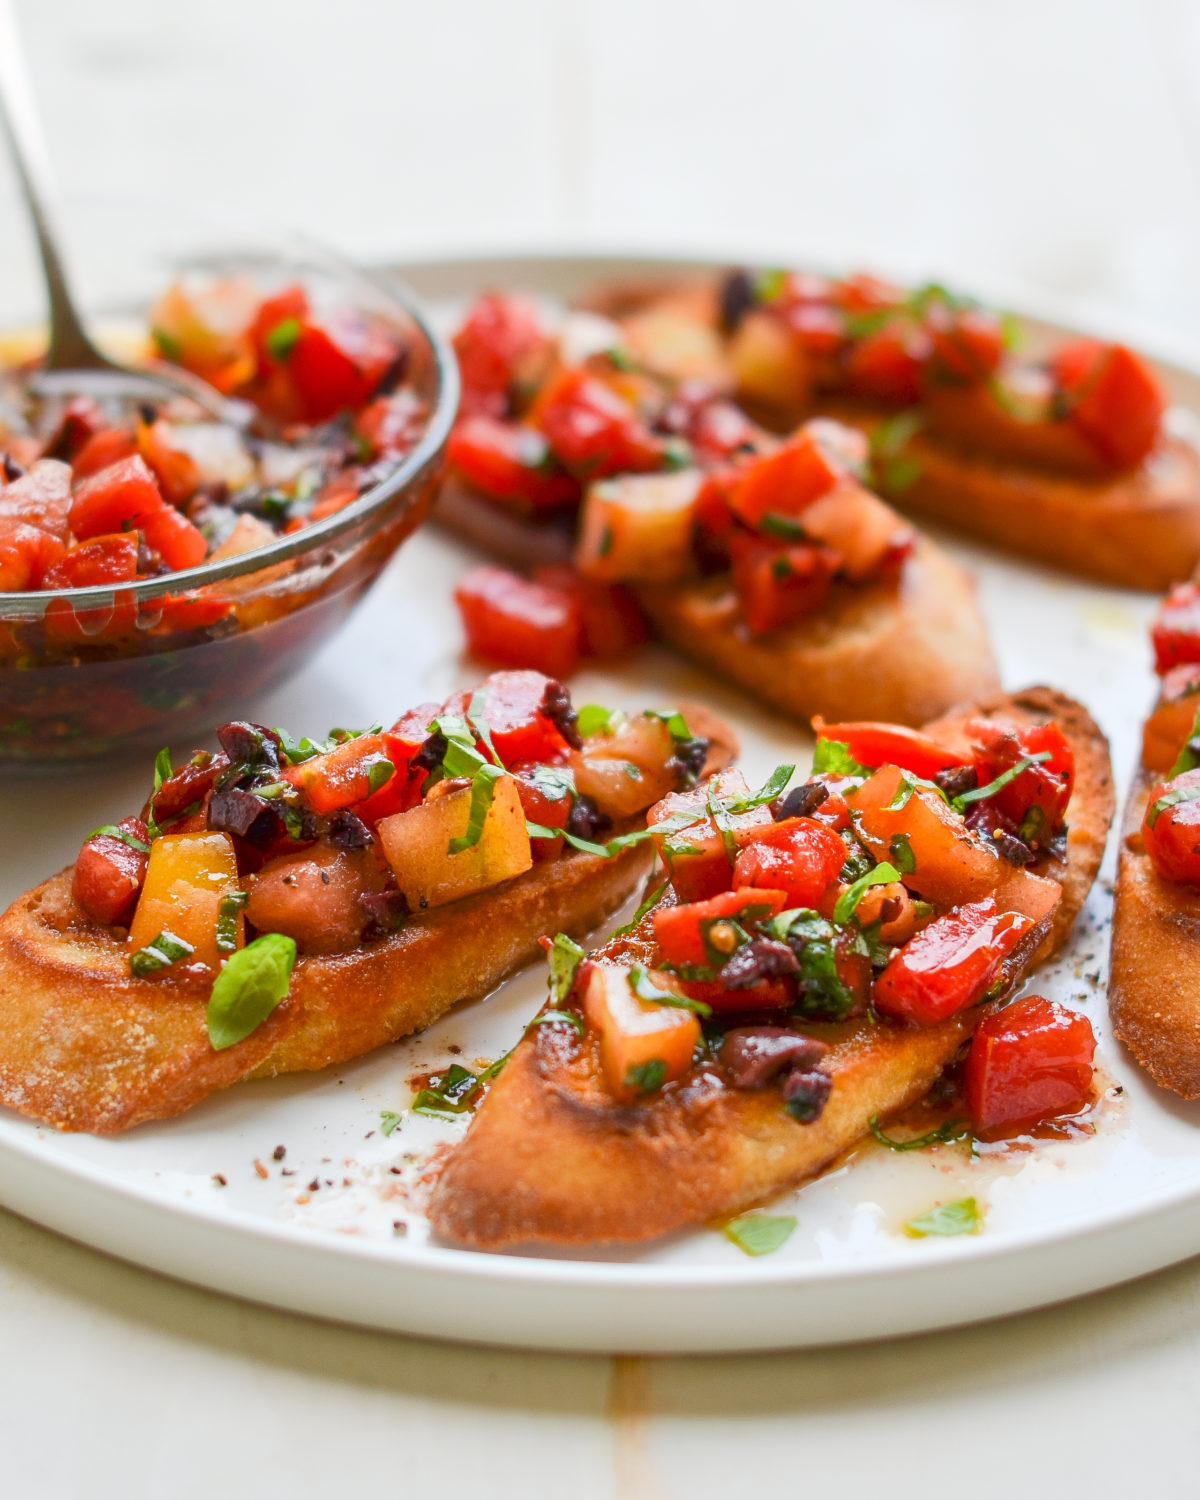 Bruschetta with Heirloom Tomatoes, Olives, and Basil